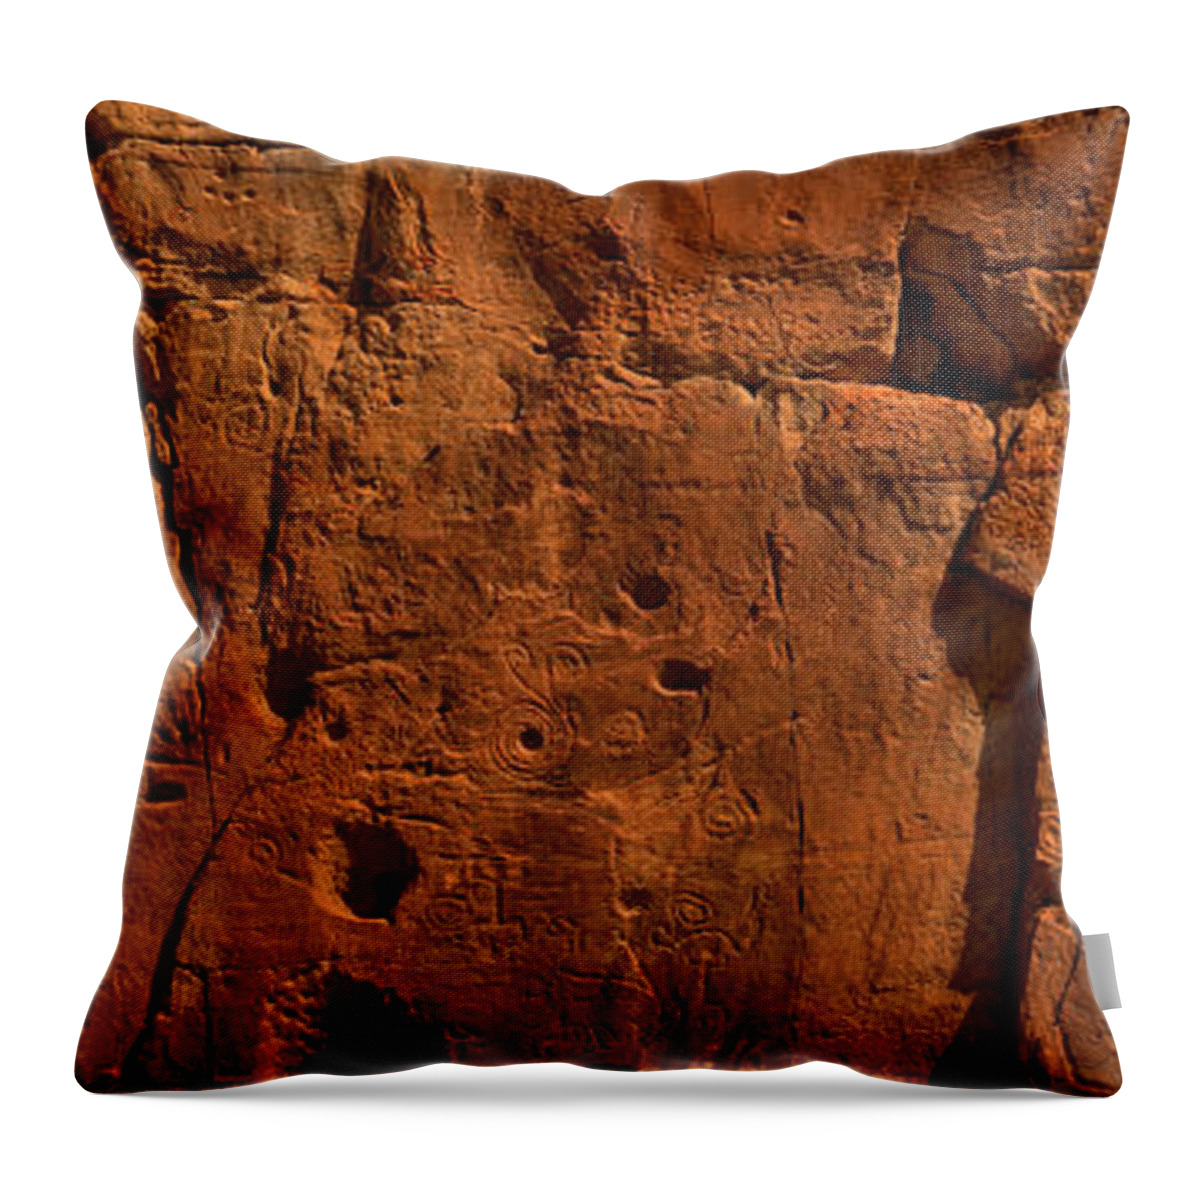 Chaco Canyon Throw Pillow featuring the photograph Chaco Culture Petroglyph Panel by Adam Jewell